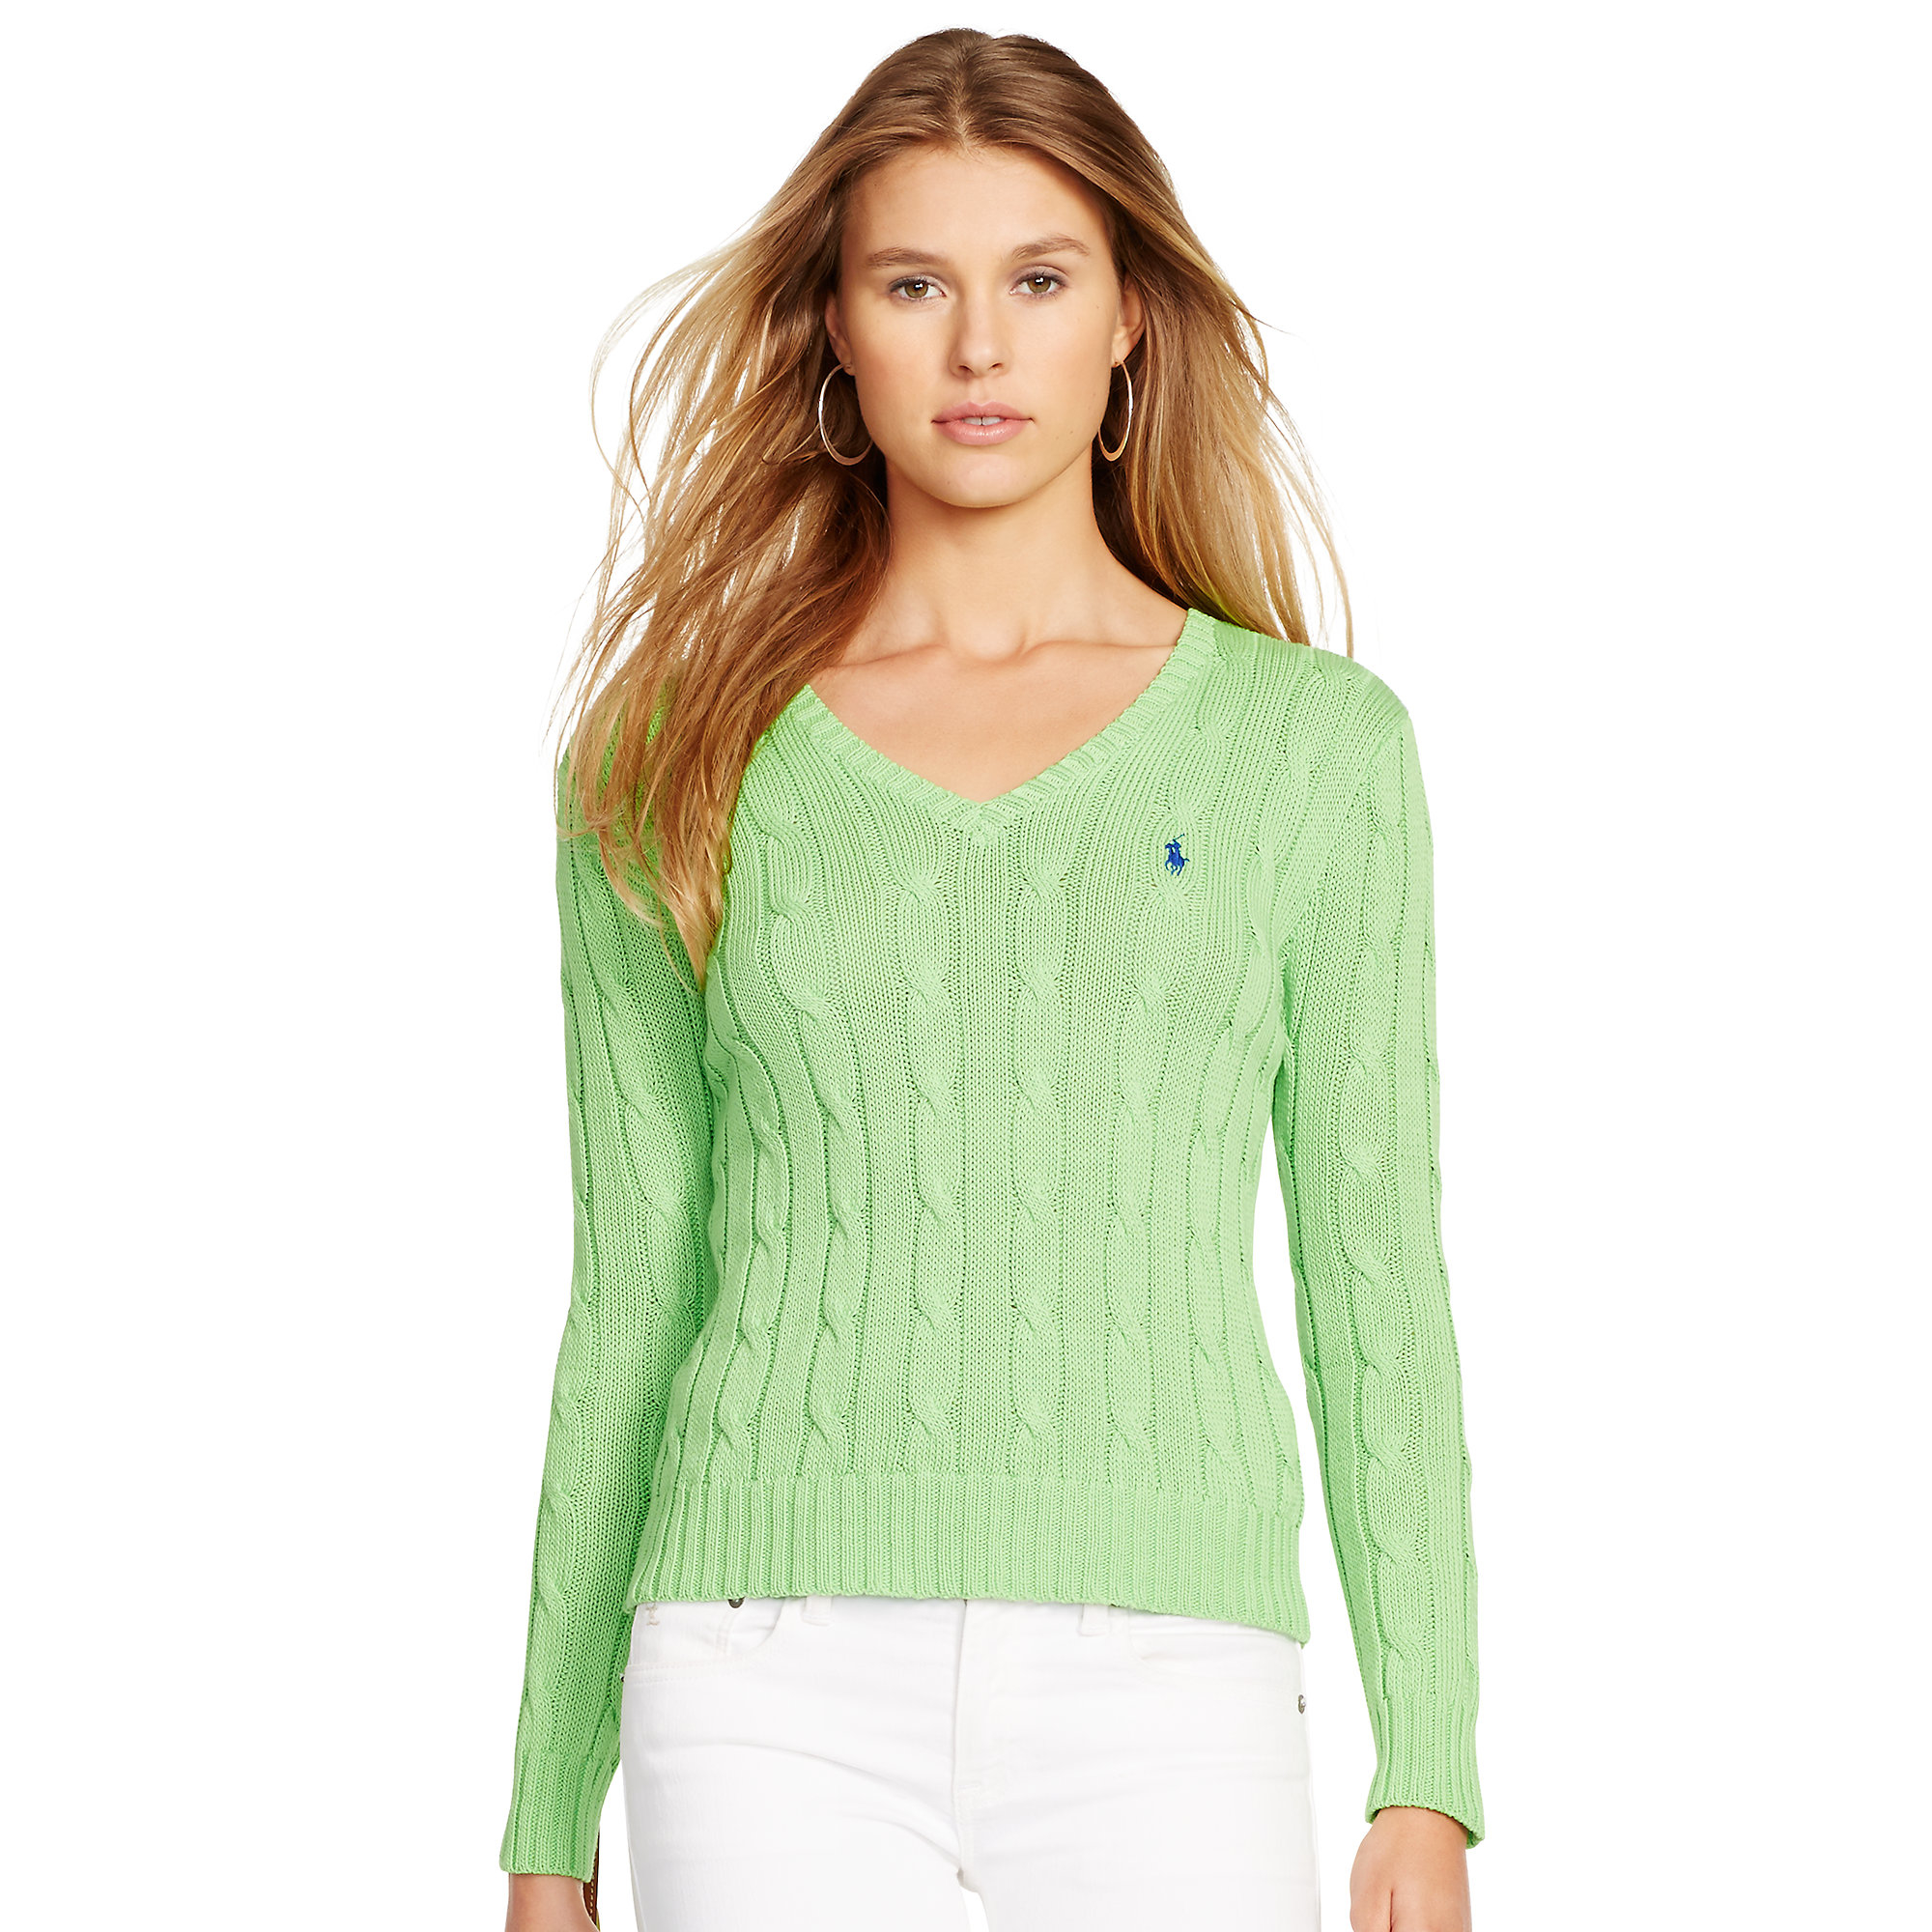 Lyst - Polo Ralph Lauren Cable V-neck Sweater in Green